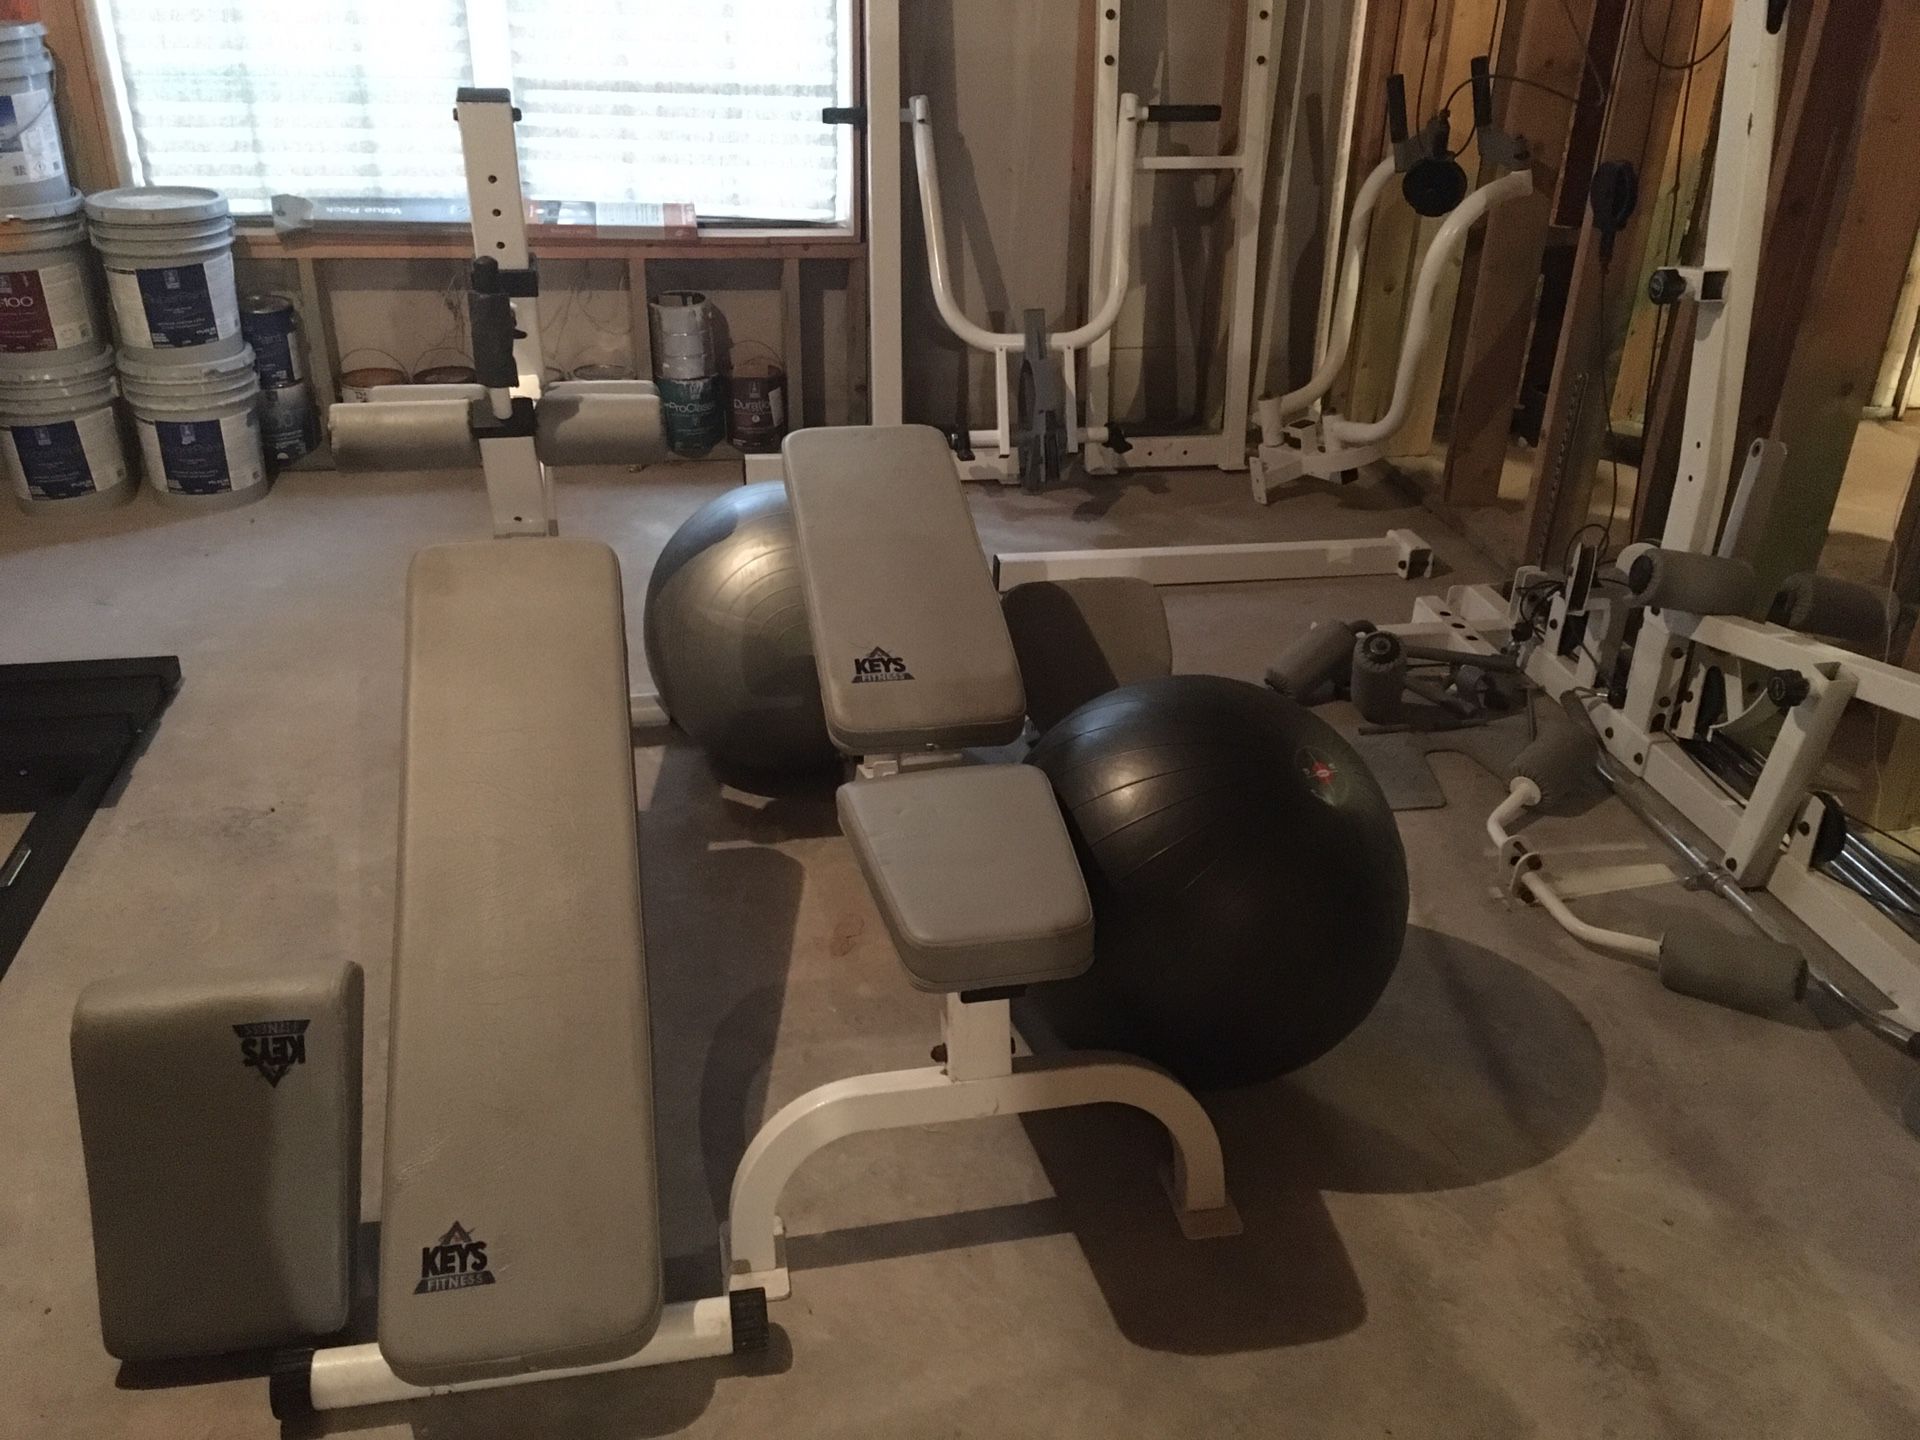 Complete Workout Exercise Station for sale . I have all the pieces & weights that come with it even workout balls !